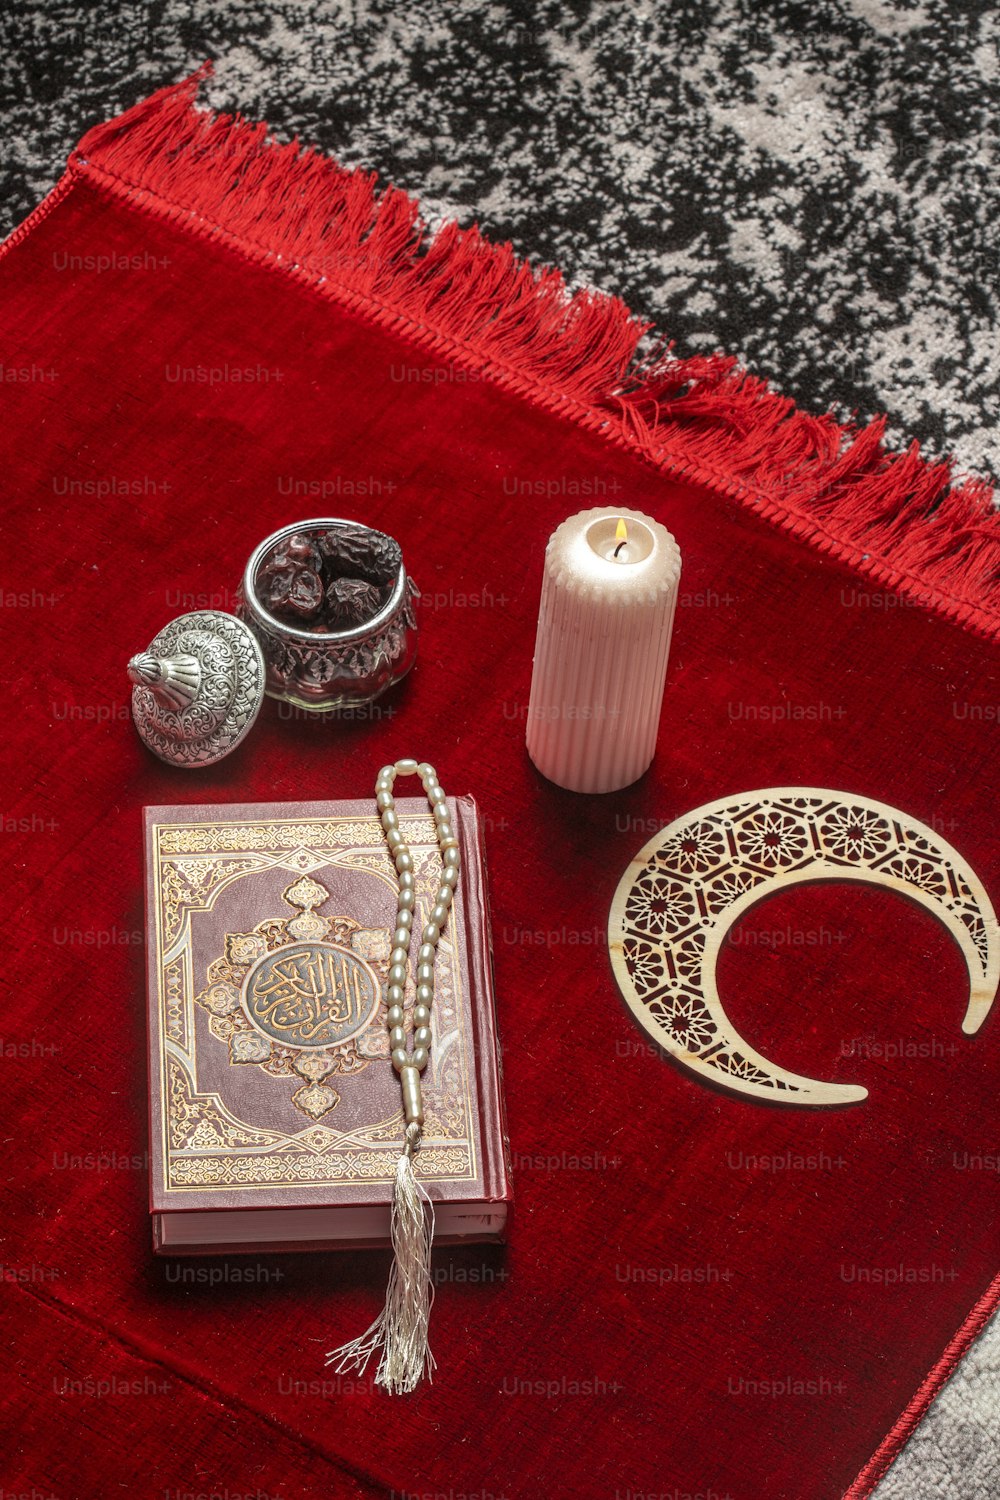 a red rug with a book, candle, and other items on it